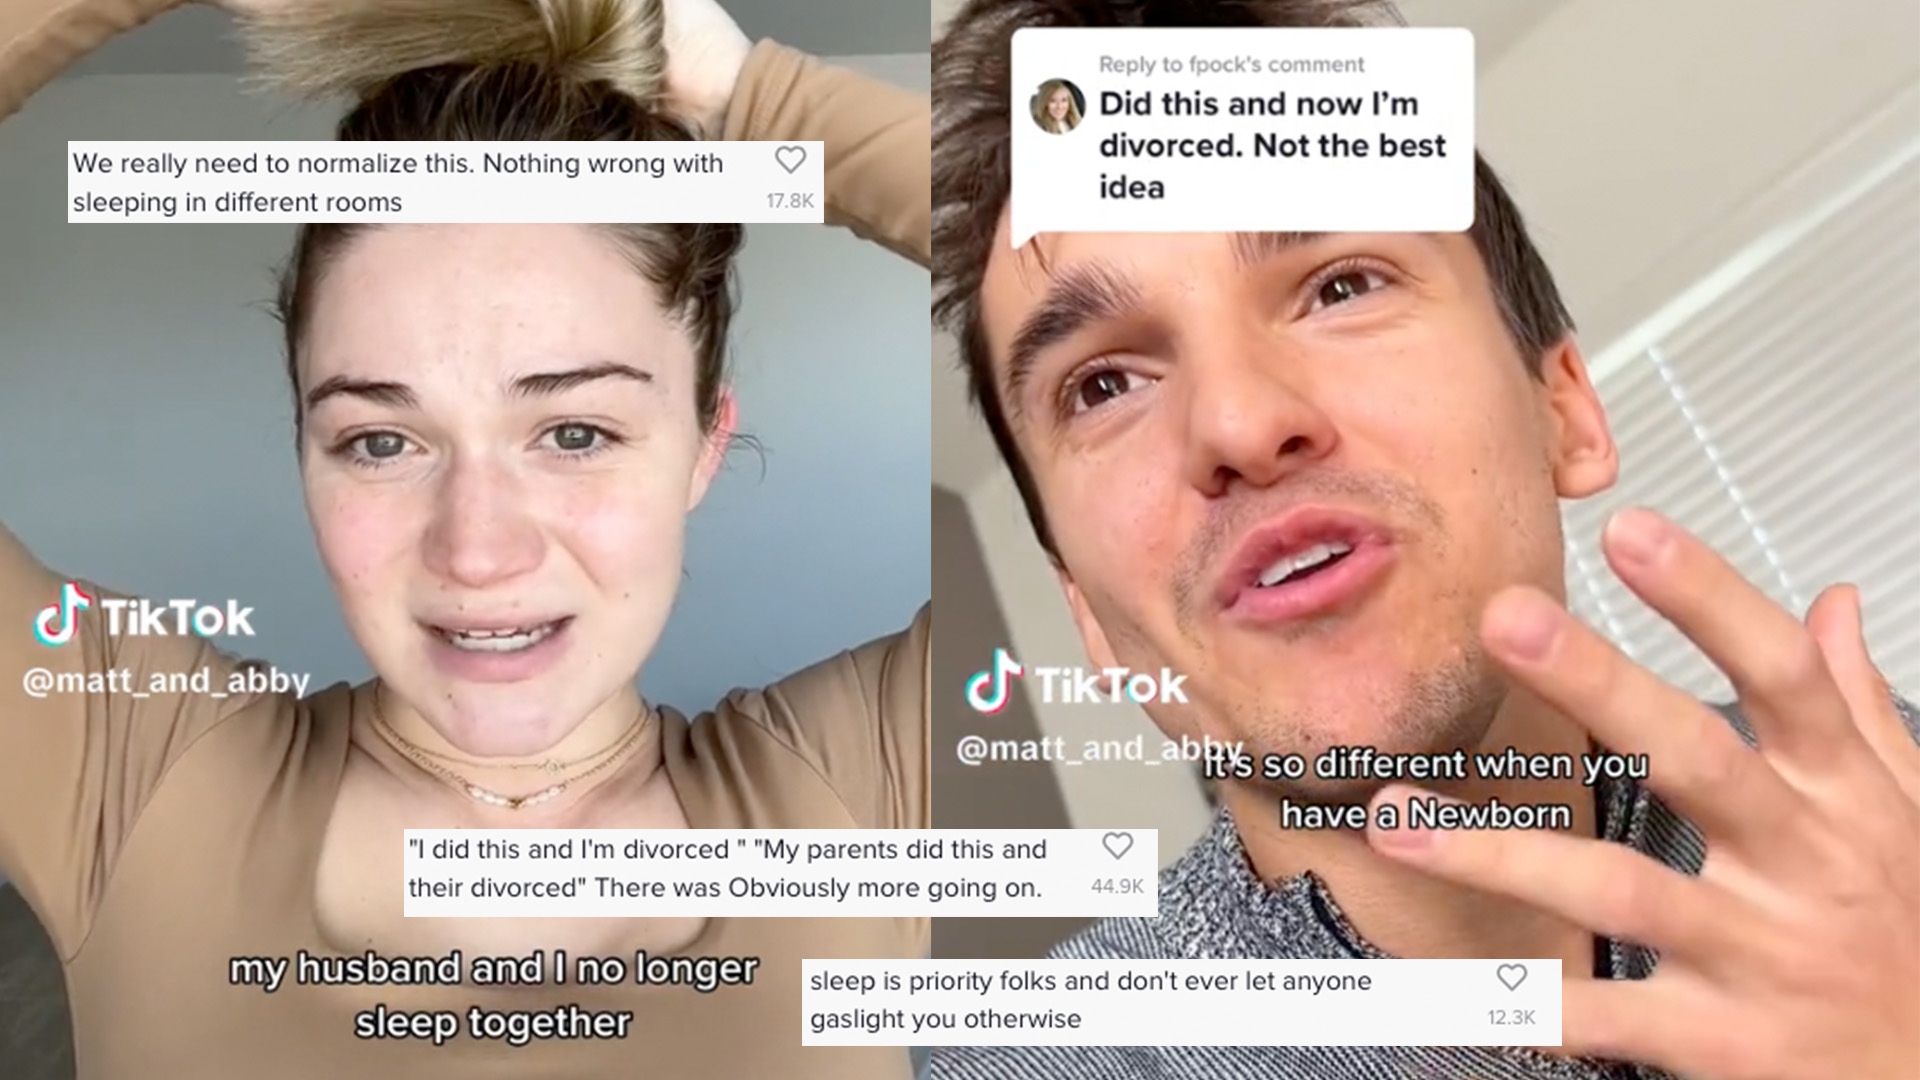 A TikTok Couple Tries a Temporary Sleep Divorce and the Internet Has Opinions